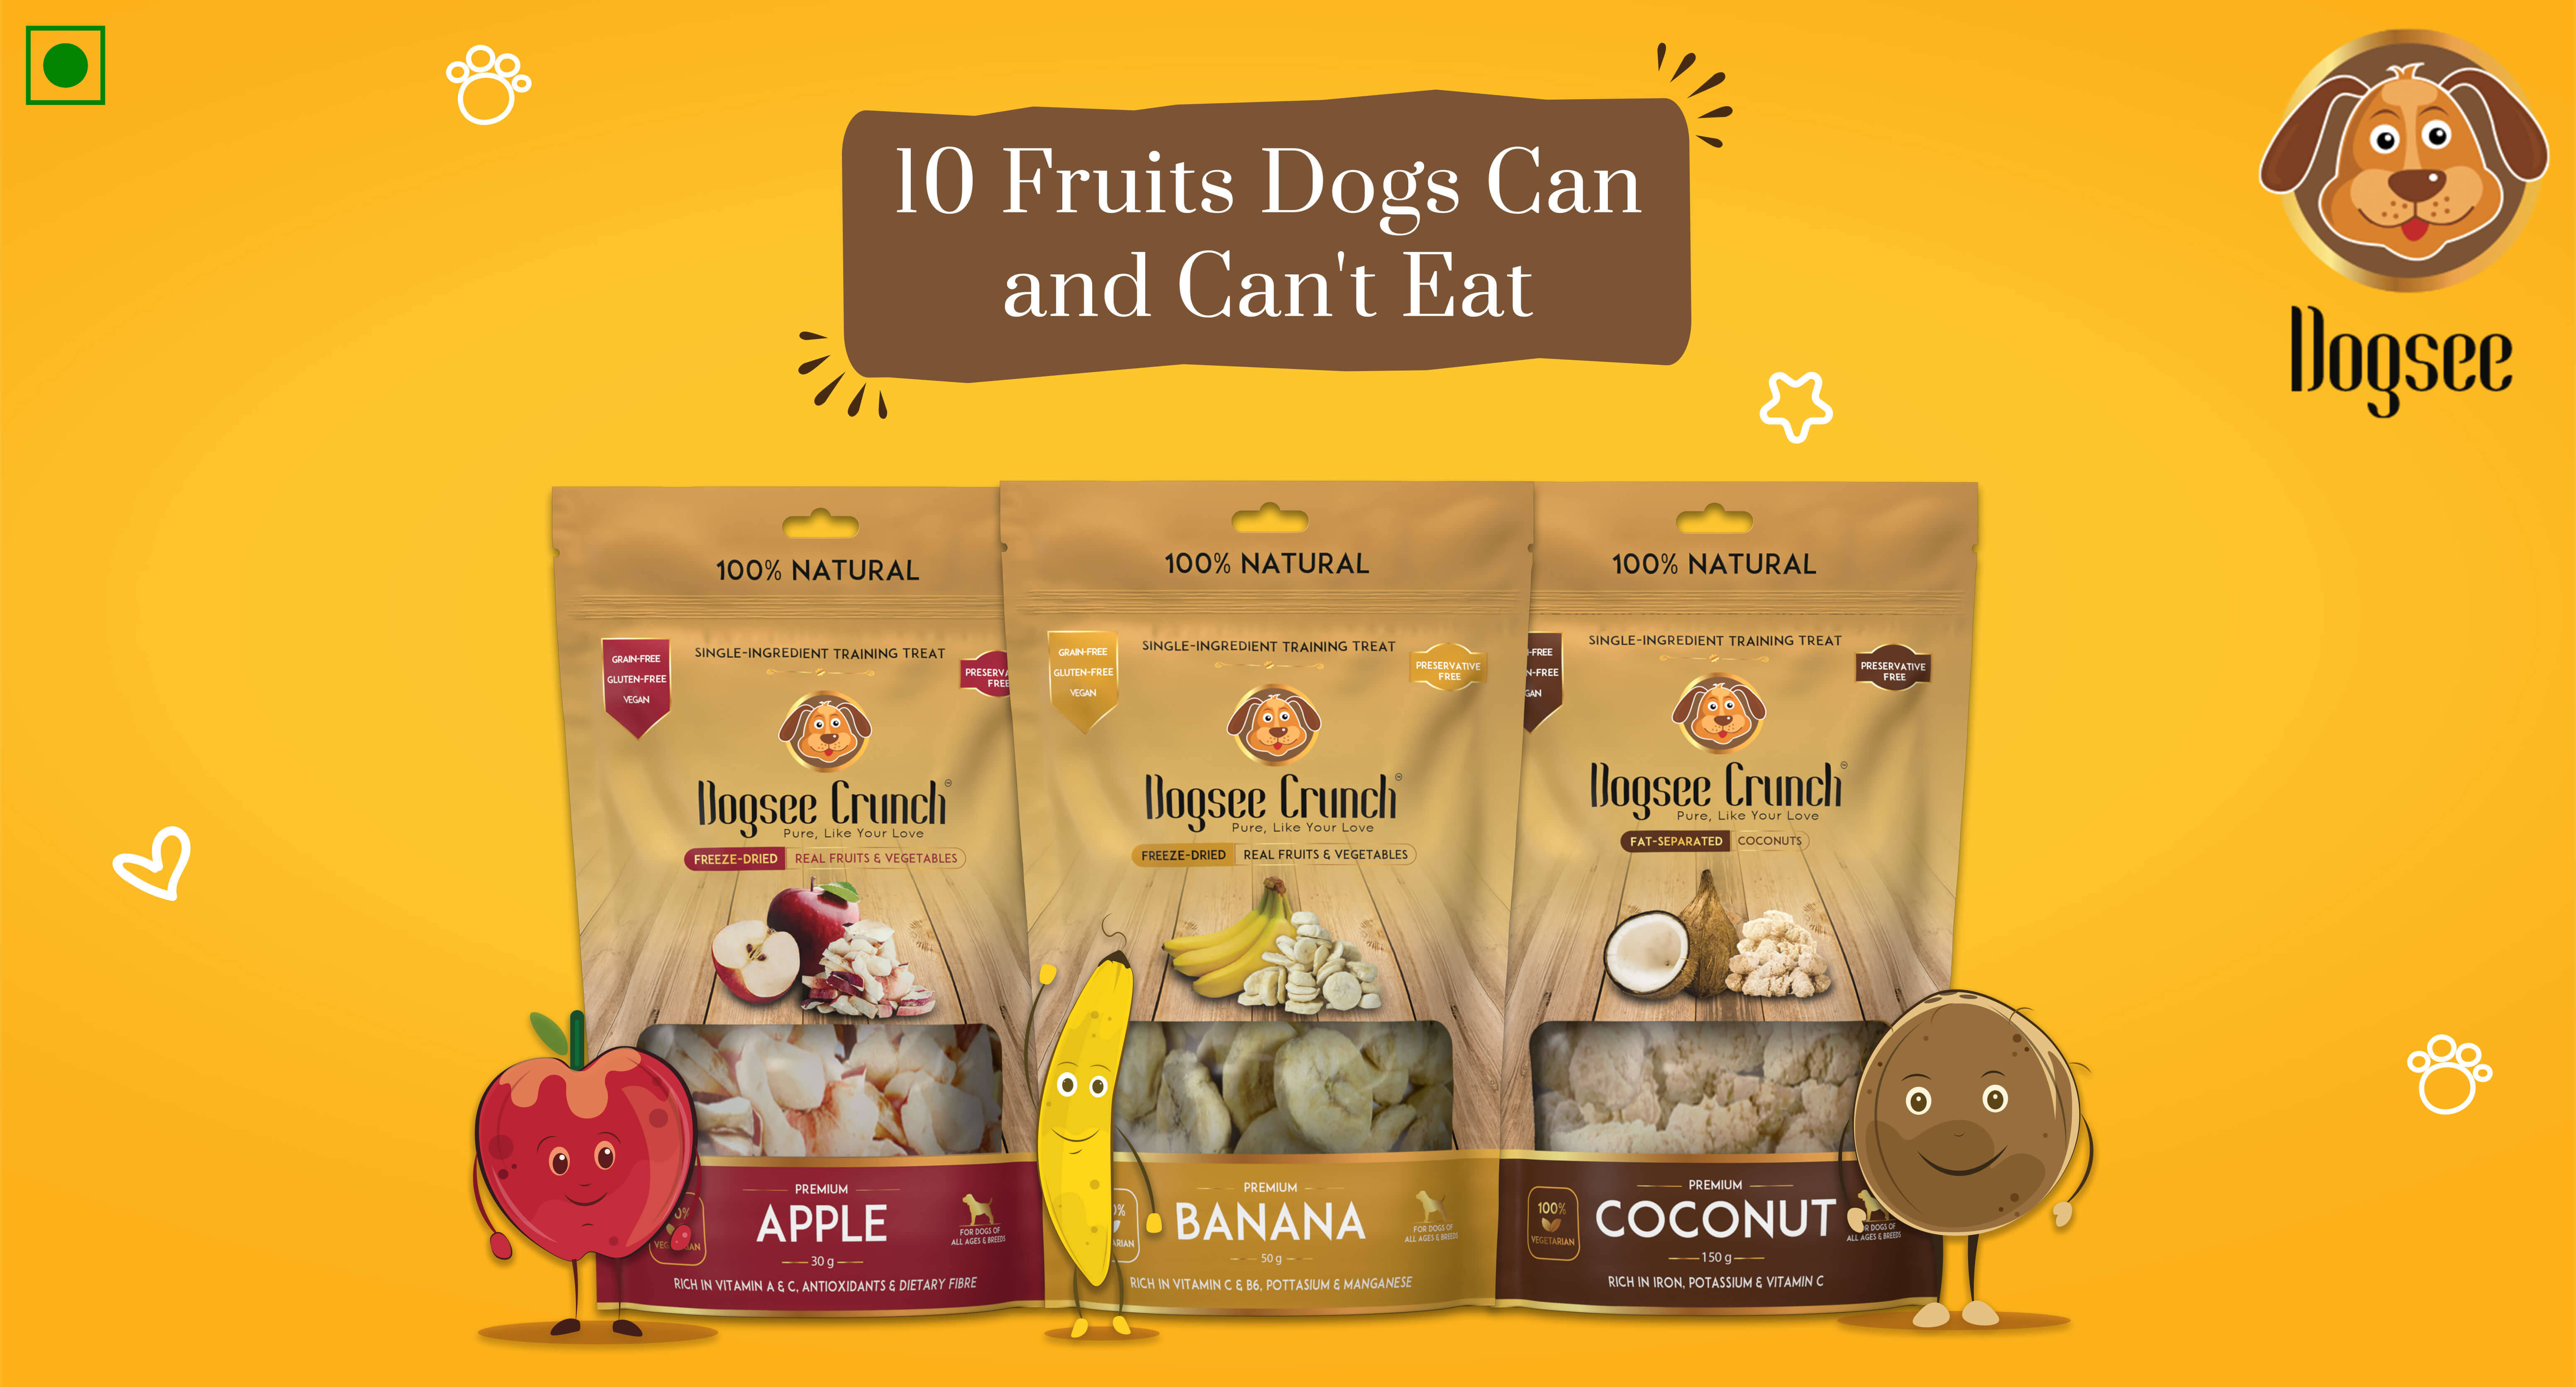 10 Fruits Dogs Can and Can't Eat